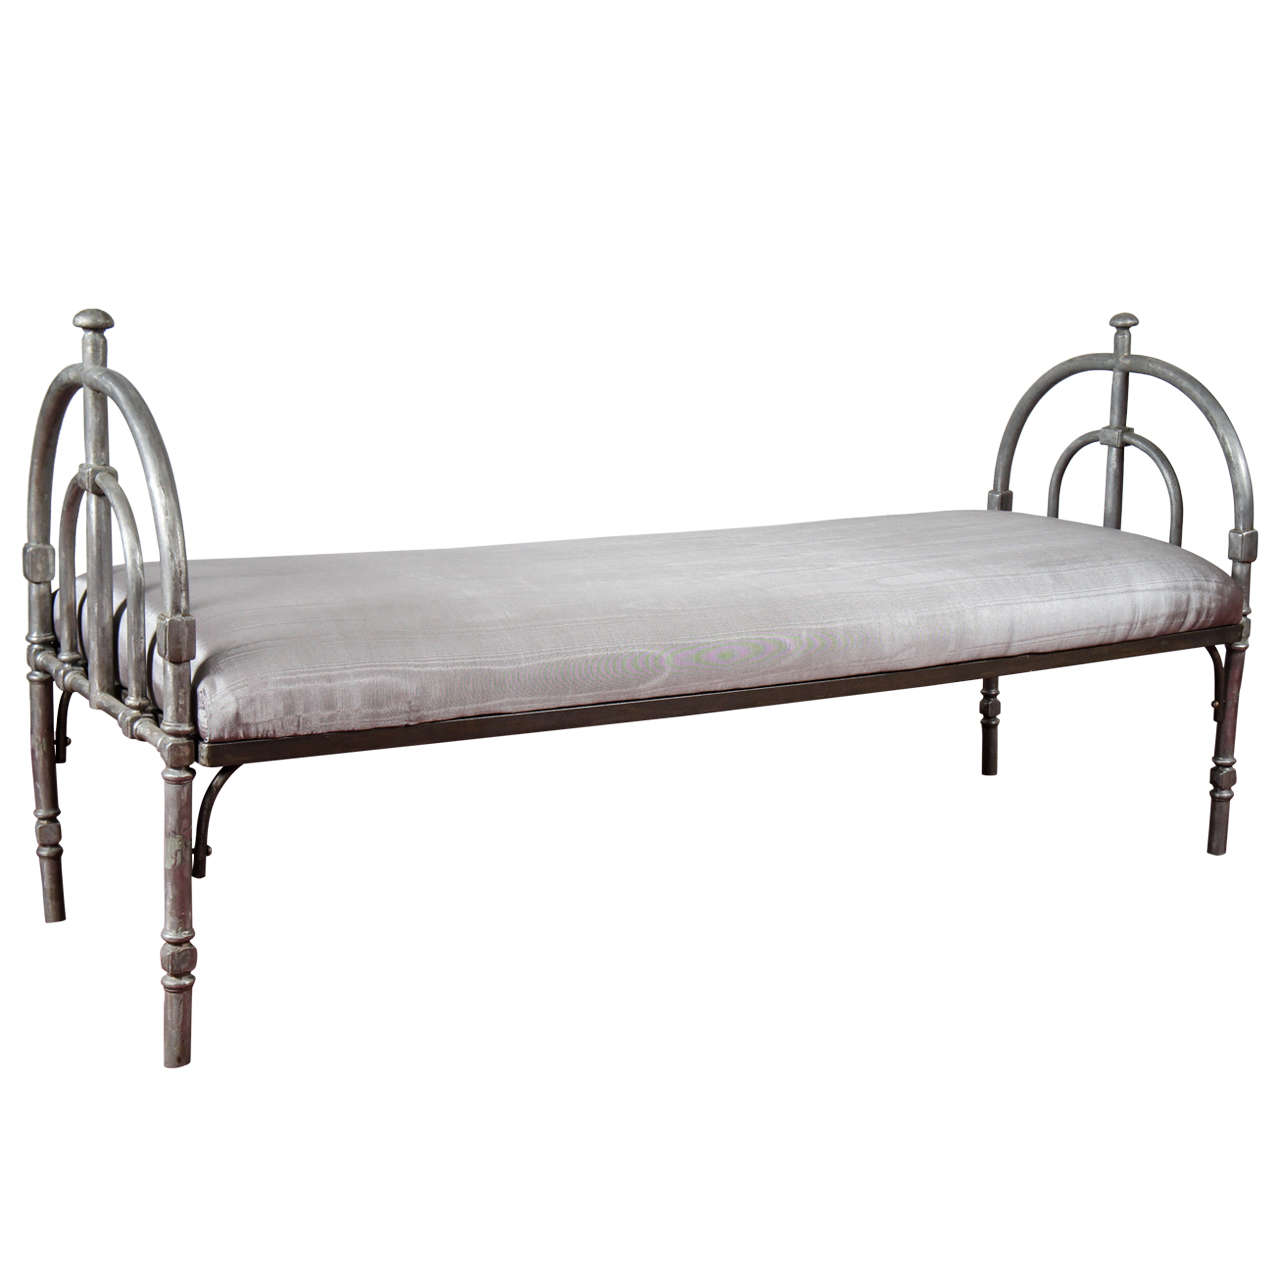 Neo-Classical Revival Silver Pewter Finish Metal Upholstered Bench